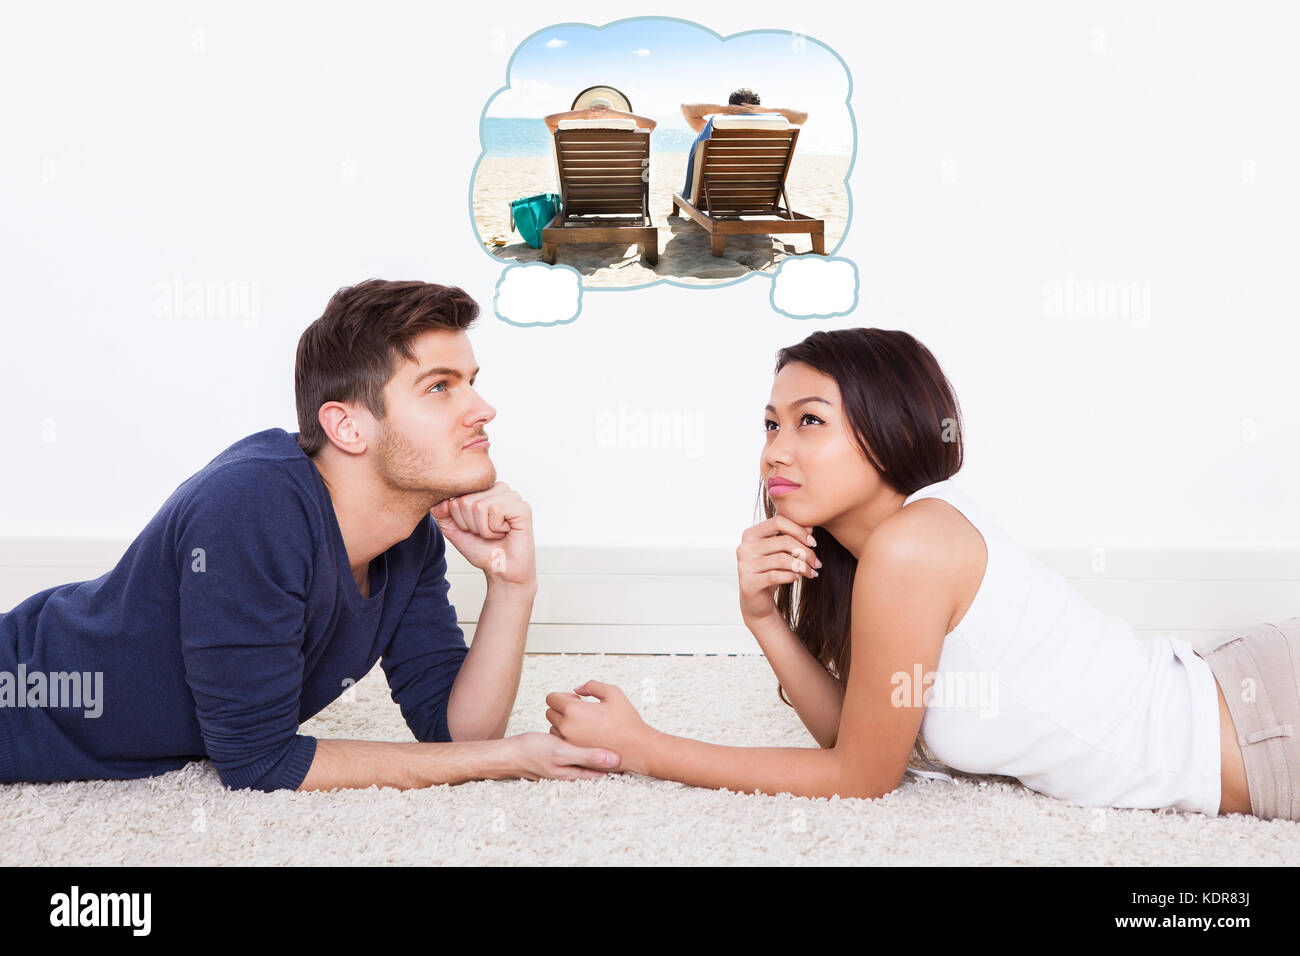 Young Couple Lying On Carpet Thinking Of Spending Vacation Together On Beach Stock Photo